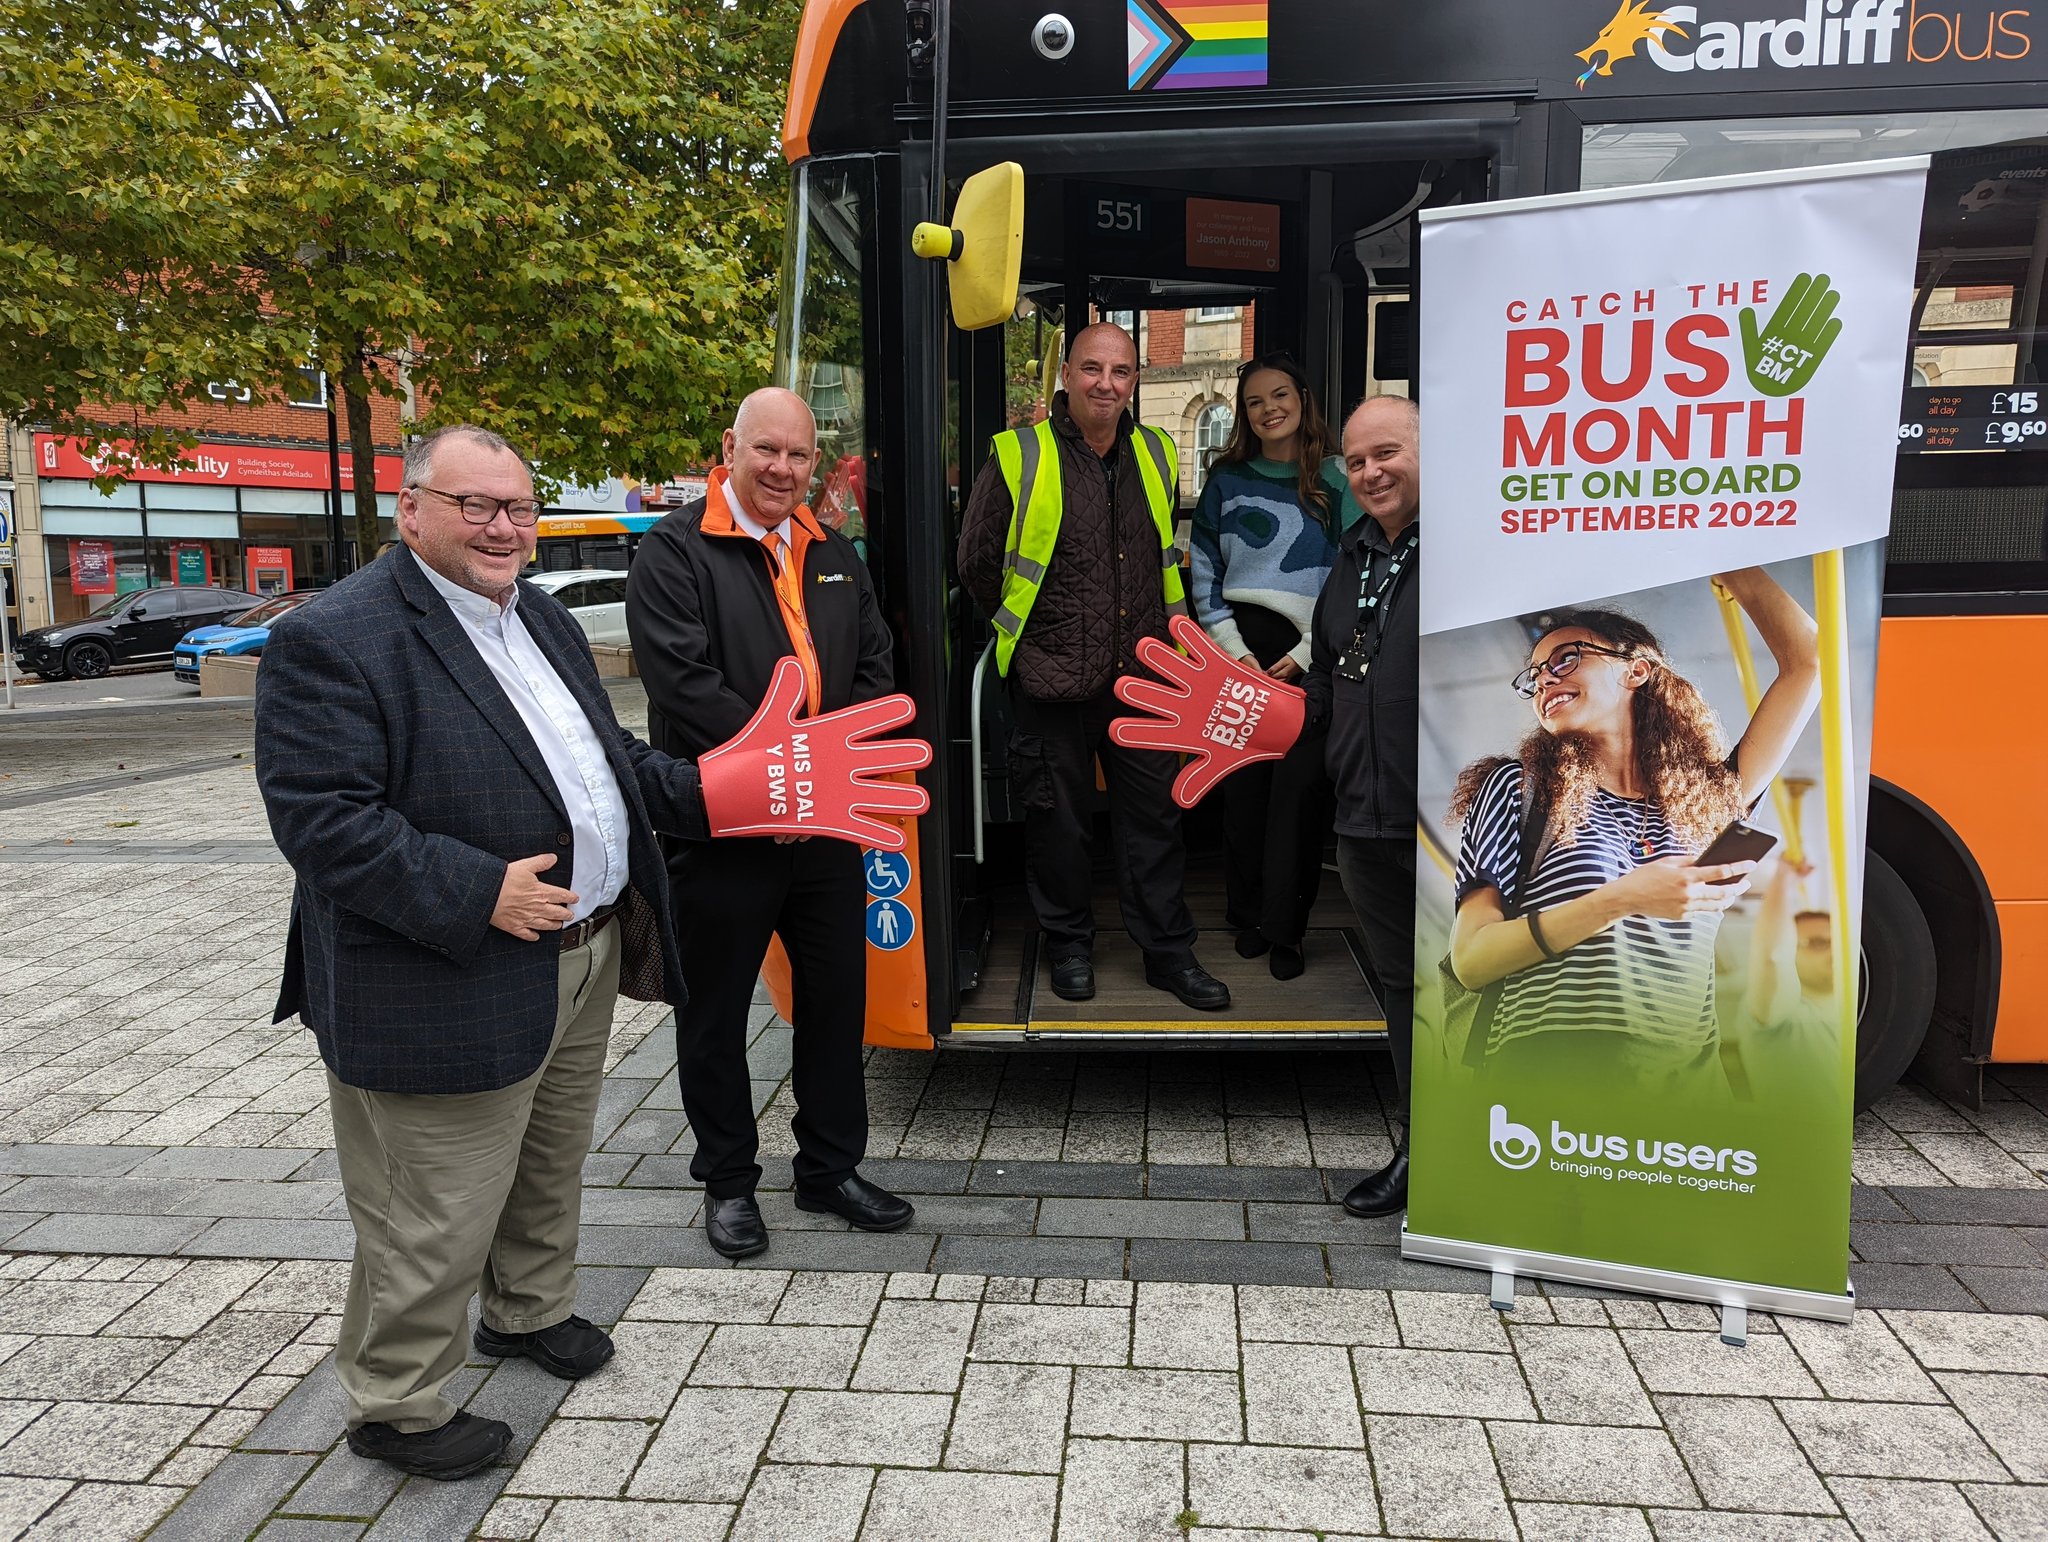 barclay davies with the team from cardiff bus in wales